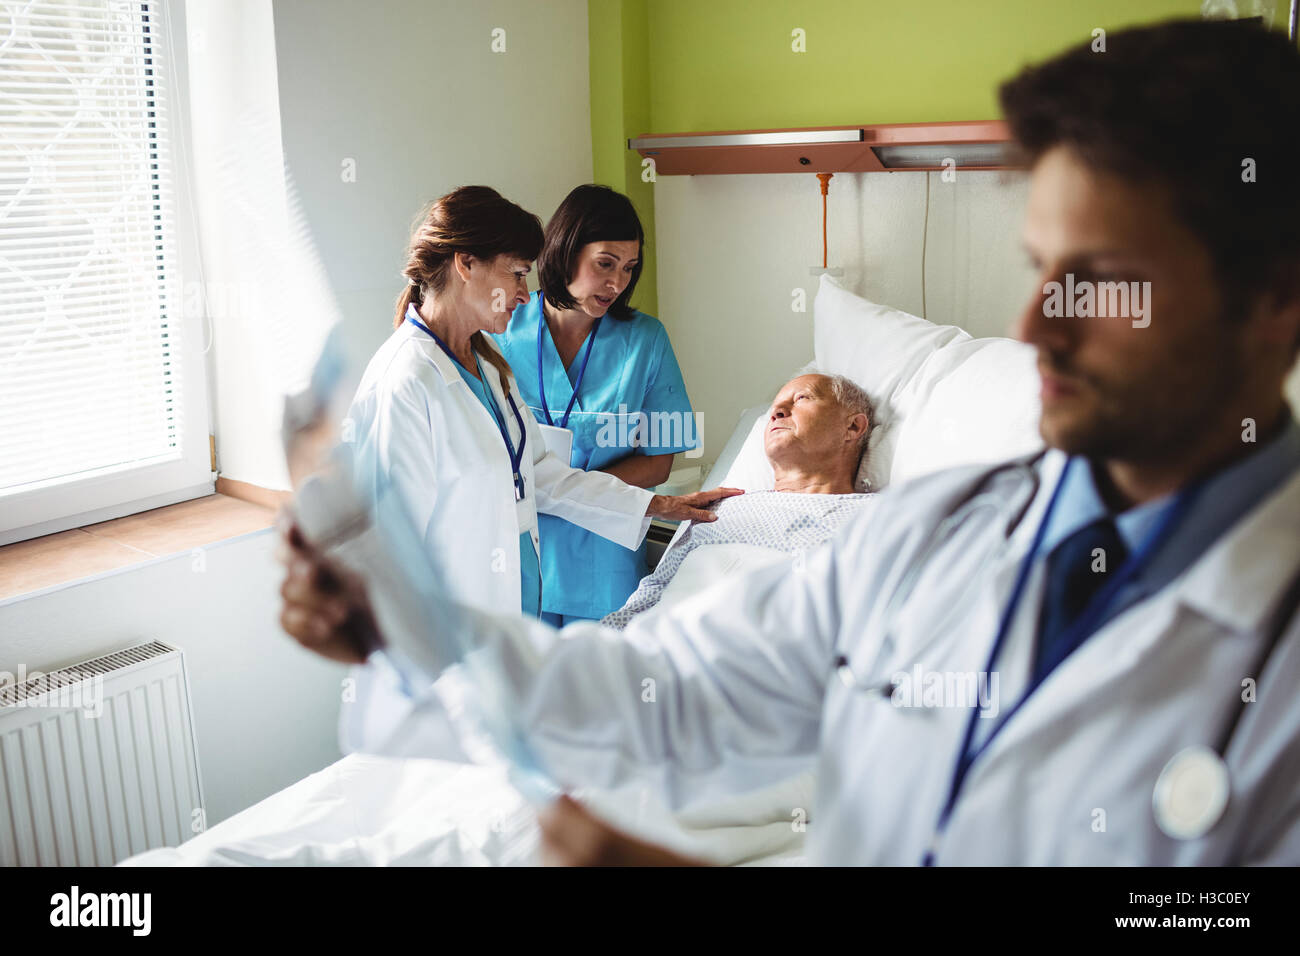 Female doctor consoling senior patient with nurse Stock Photo